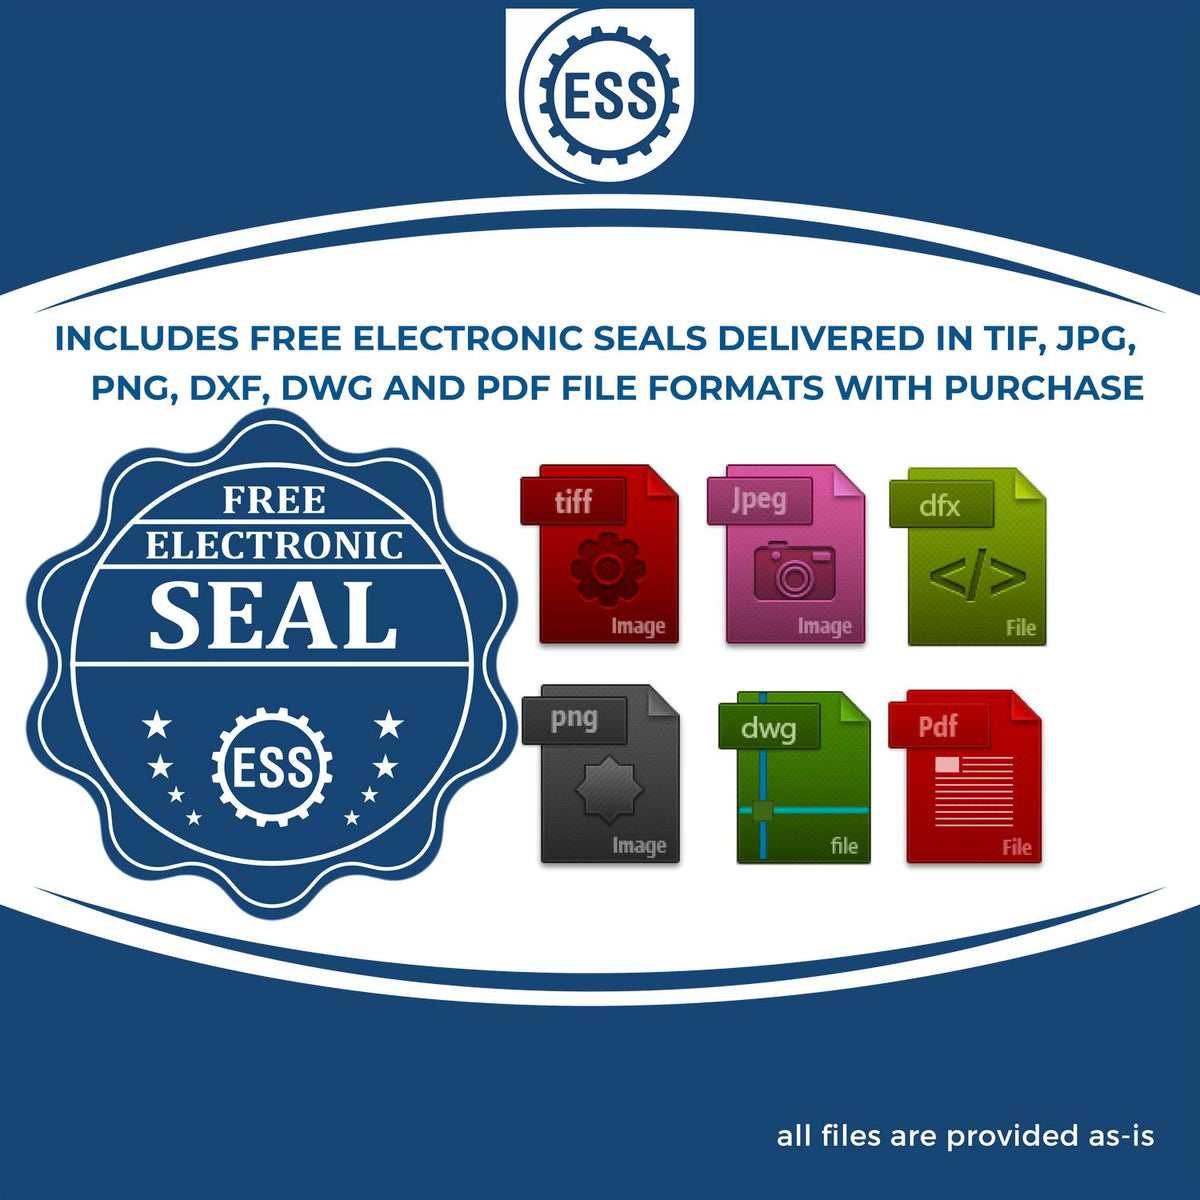 An infographic for the free electronic seal for the Self-Inking Iowa Geologist Stamp illustrating the different file type icons such as DXF, DWG, TIF, JPG and PNG.